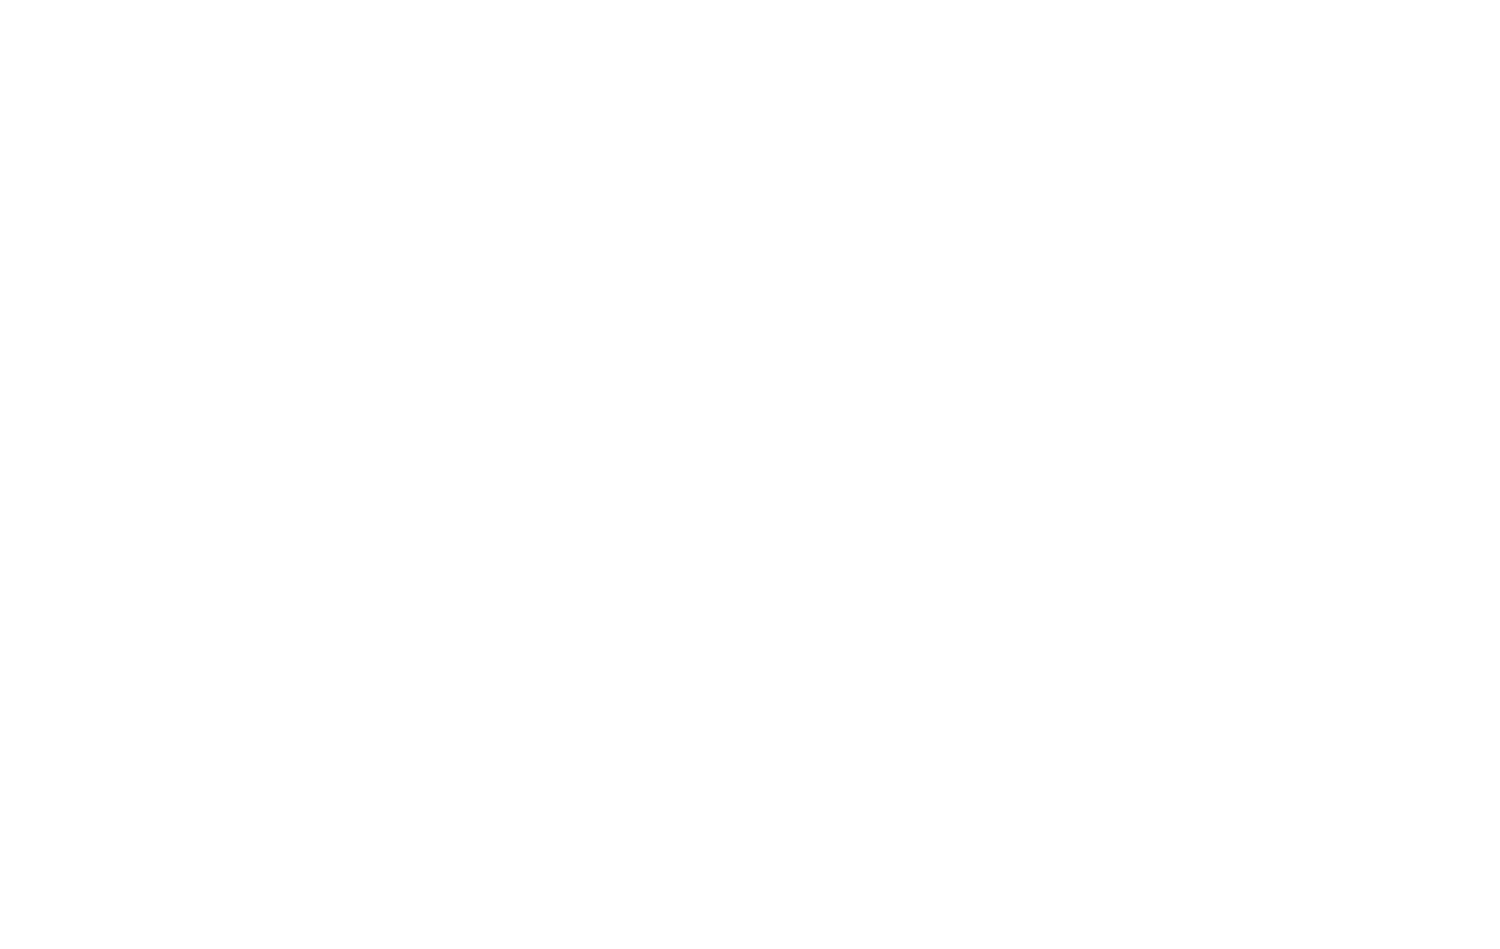 The Centre of Body & Mind